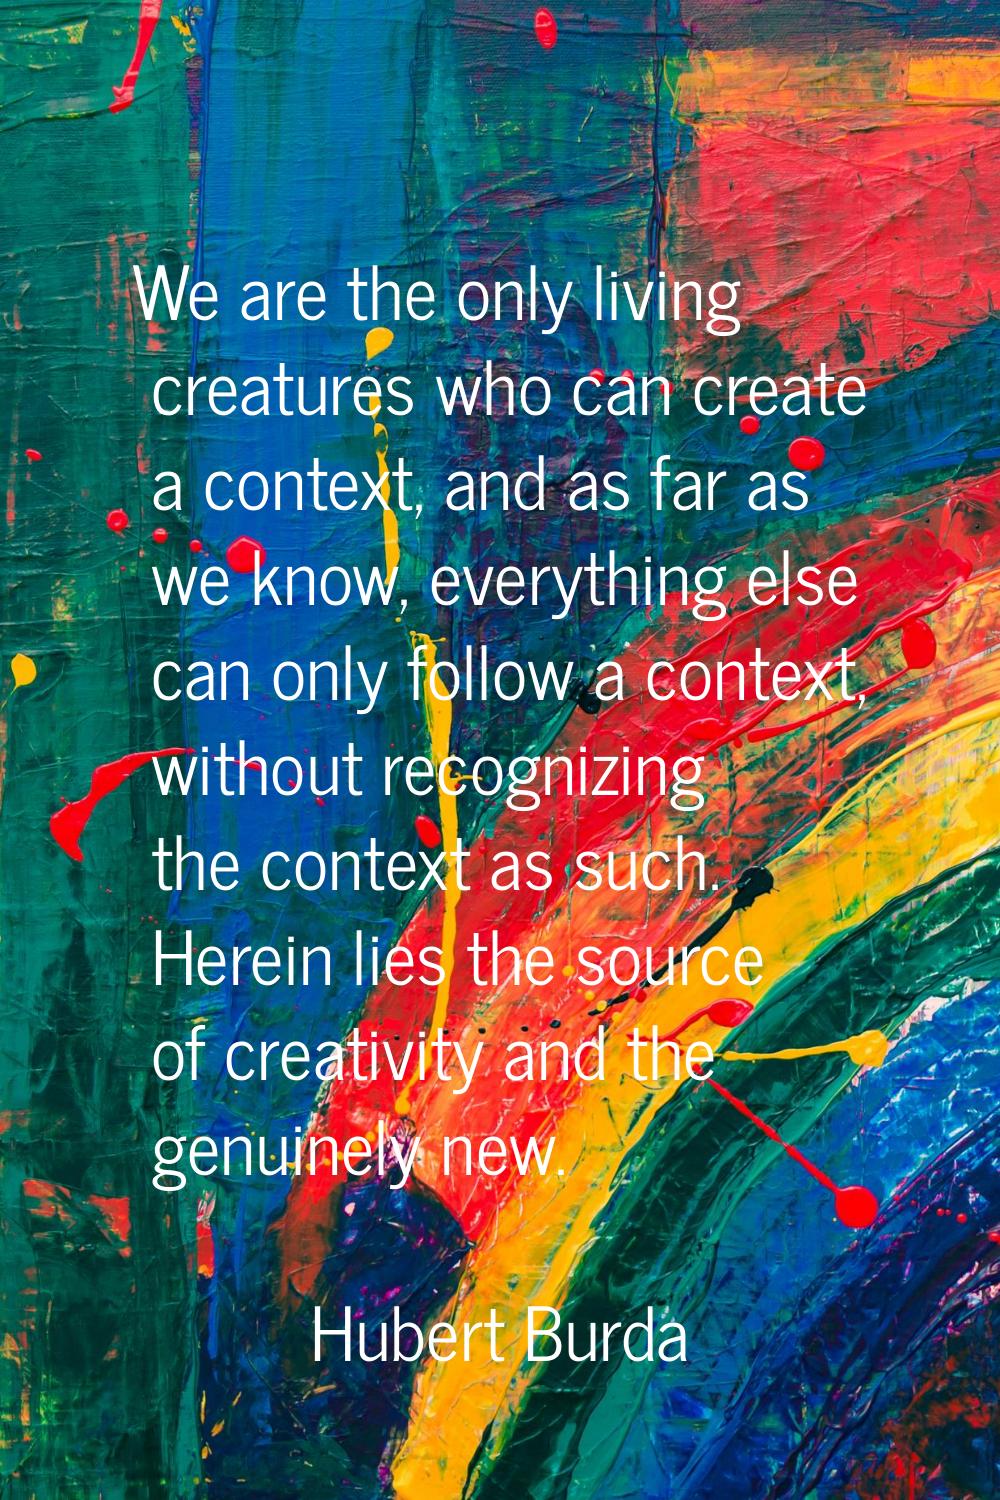 We are the only living creatures who can create a context, and as far as we know, everything else c